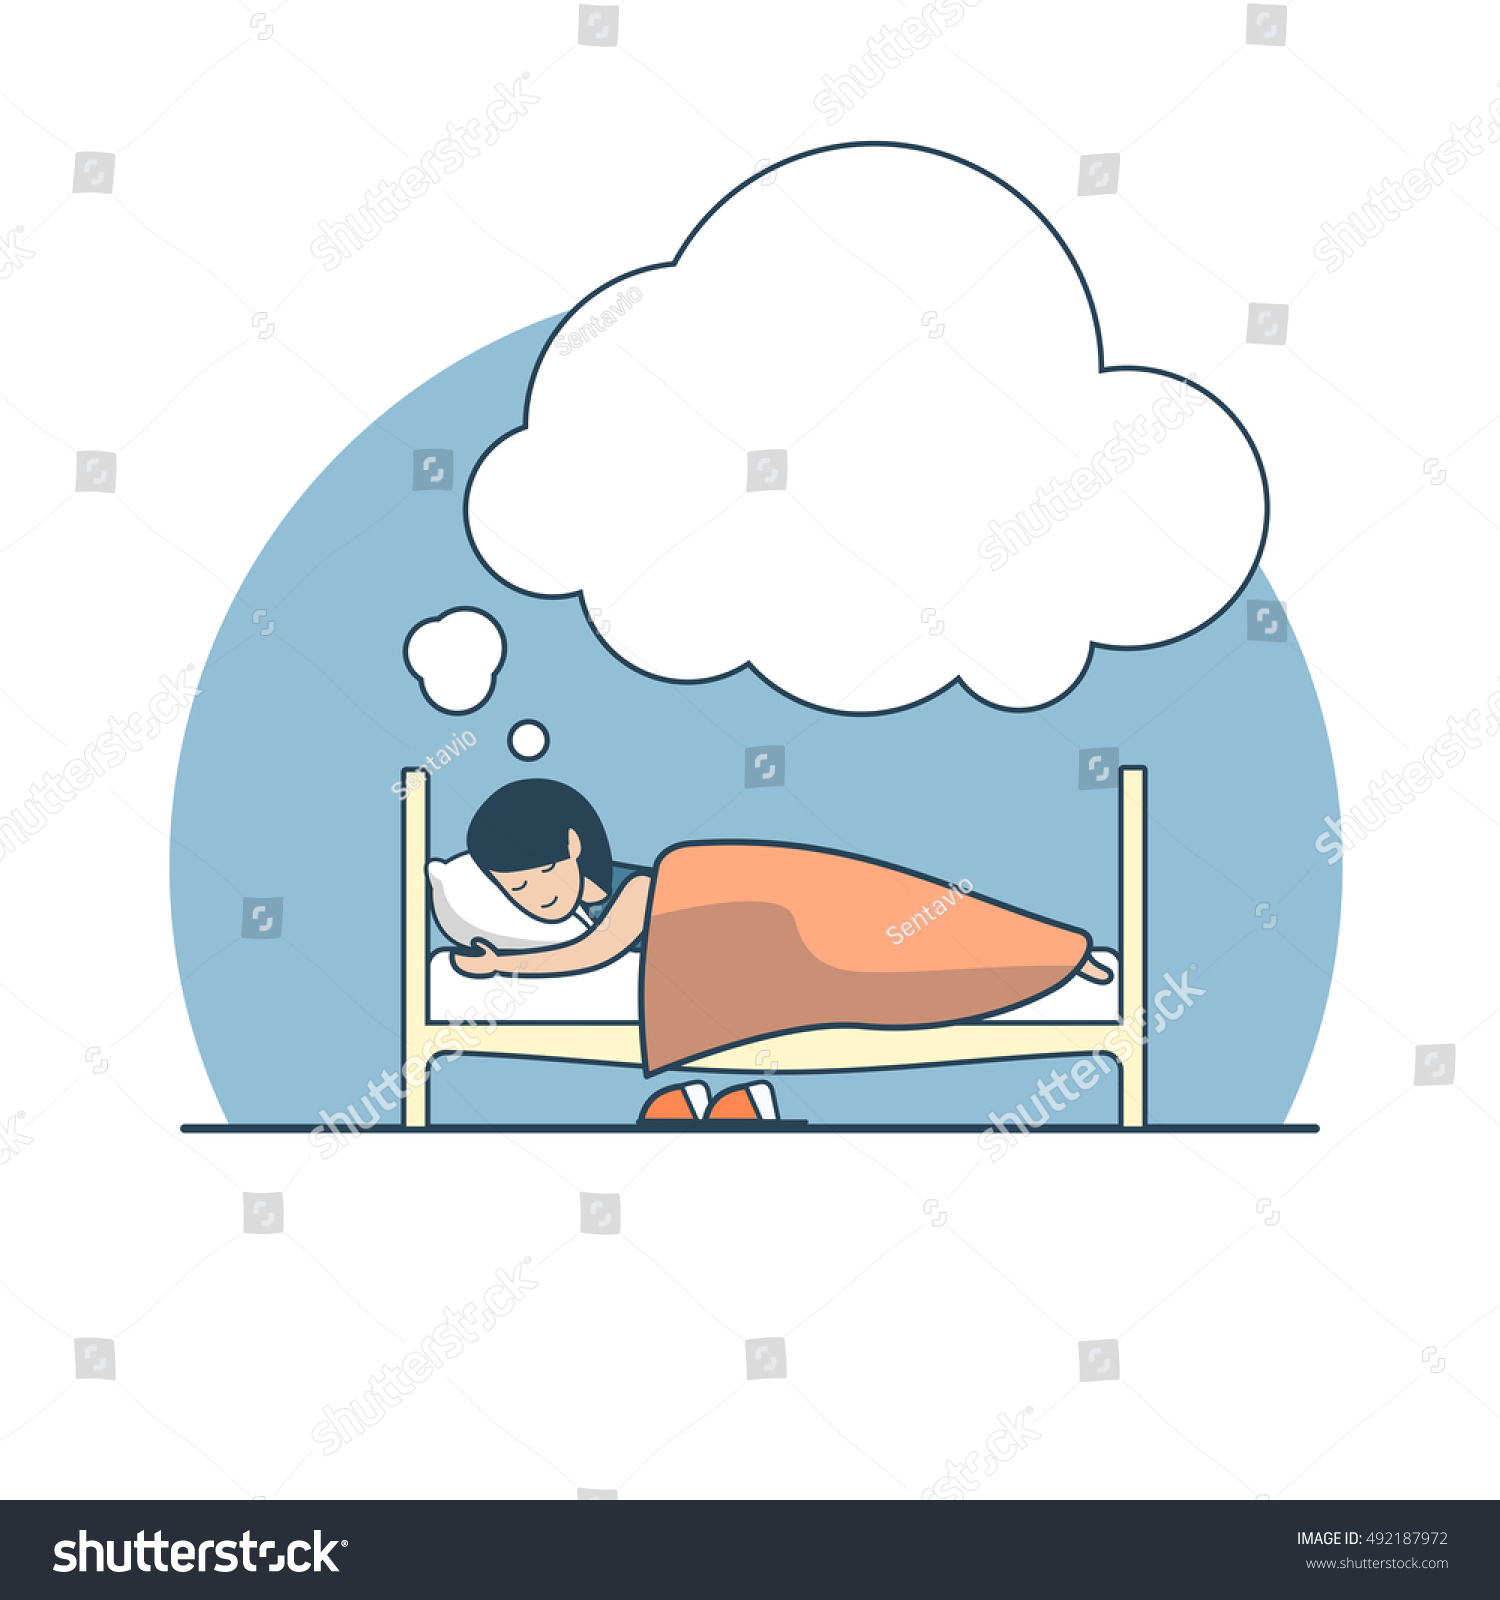 Linear Flat Girl Sleeping Dreaming On Stock Vector (Royalty Free ...